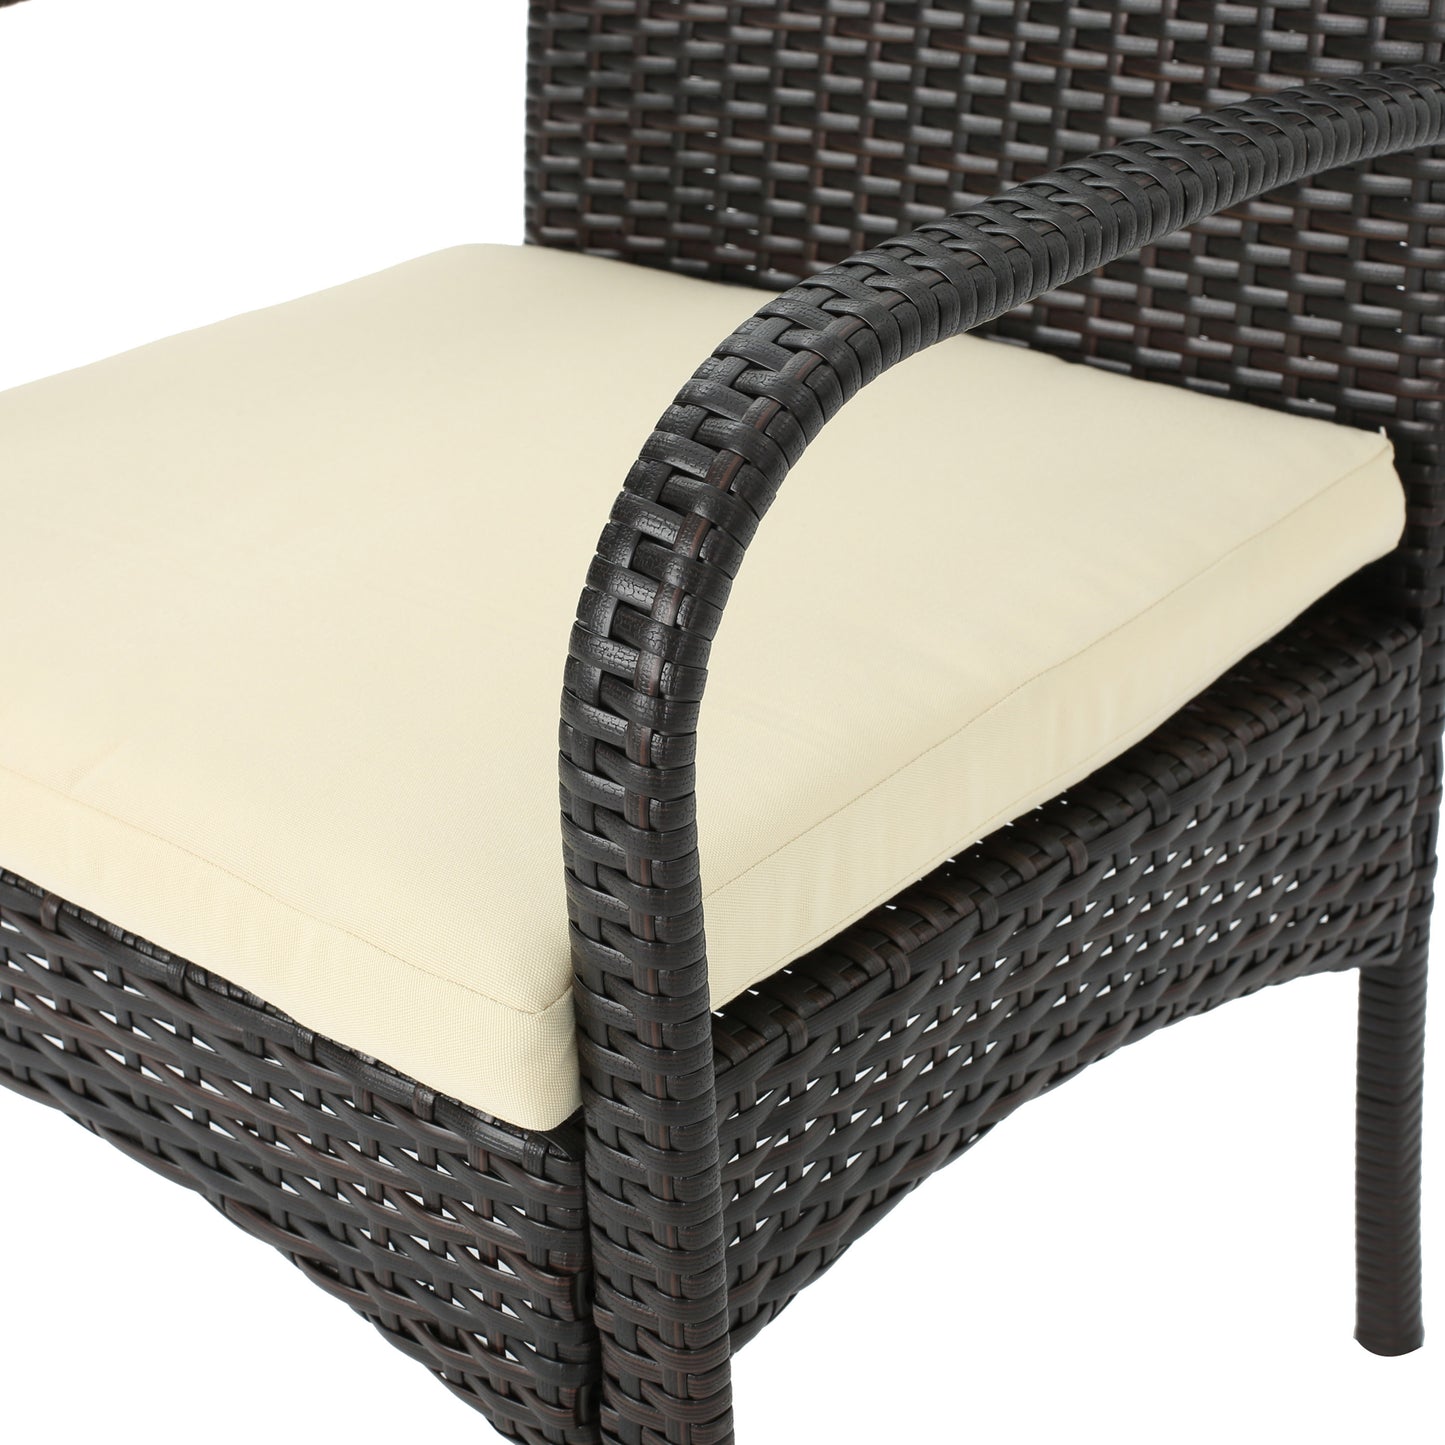 Carmela Outdoor Multibrown PE Wicker Dining Chairs (Set of 2)